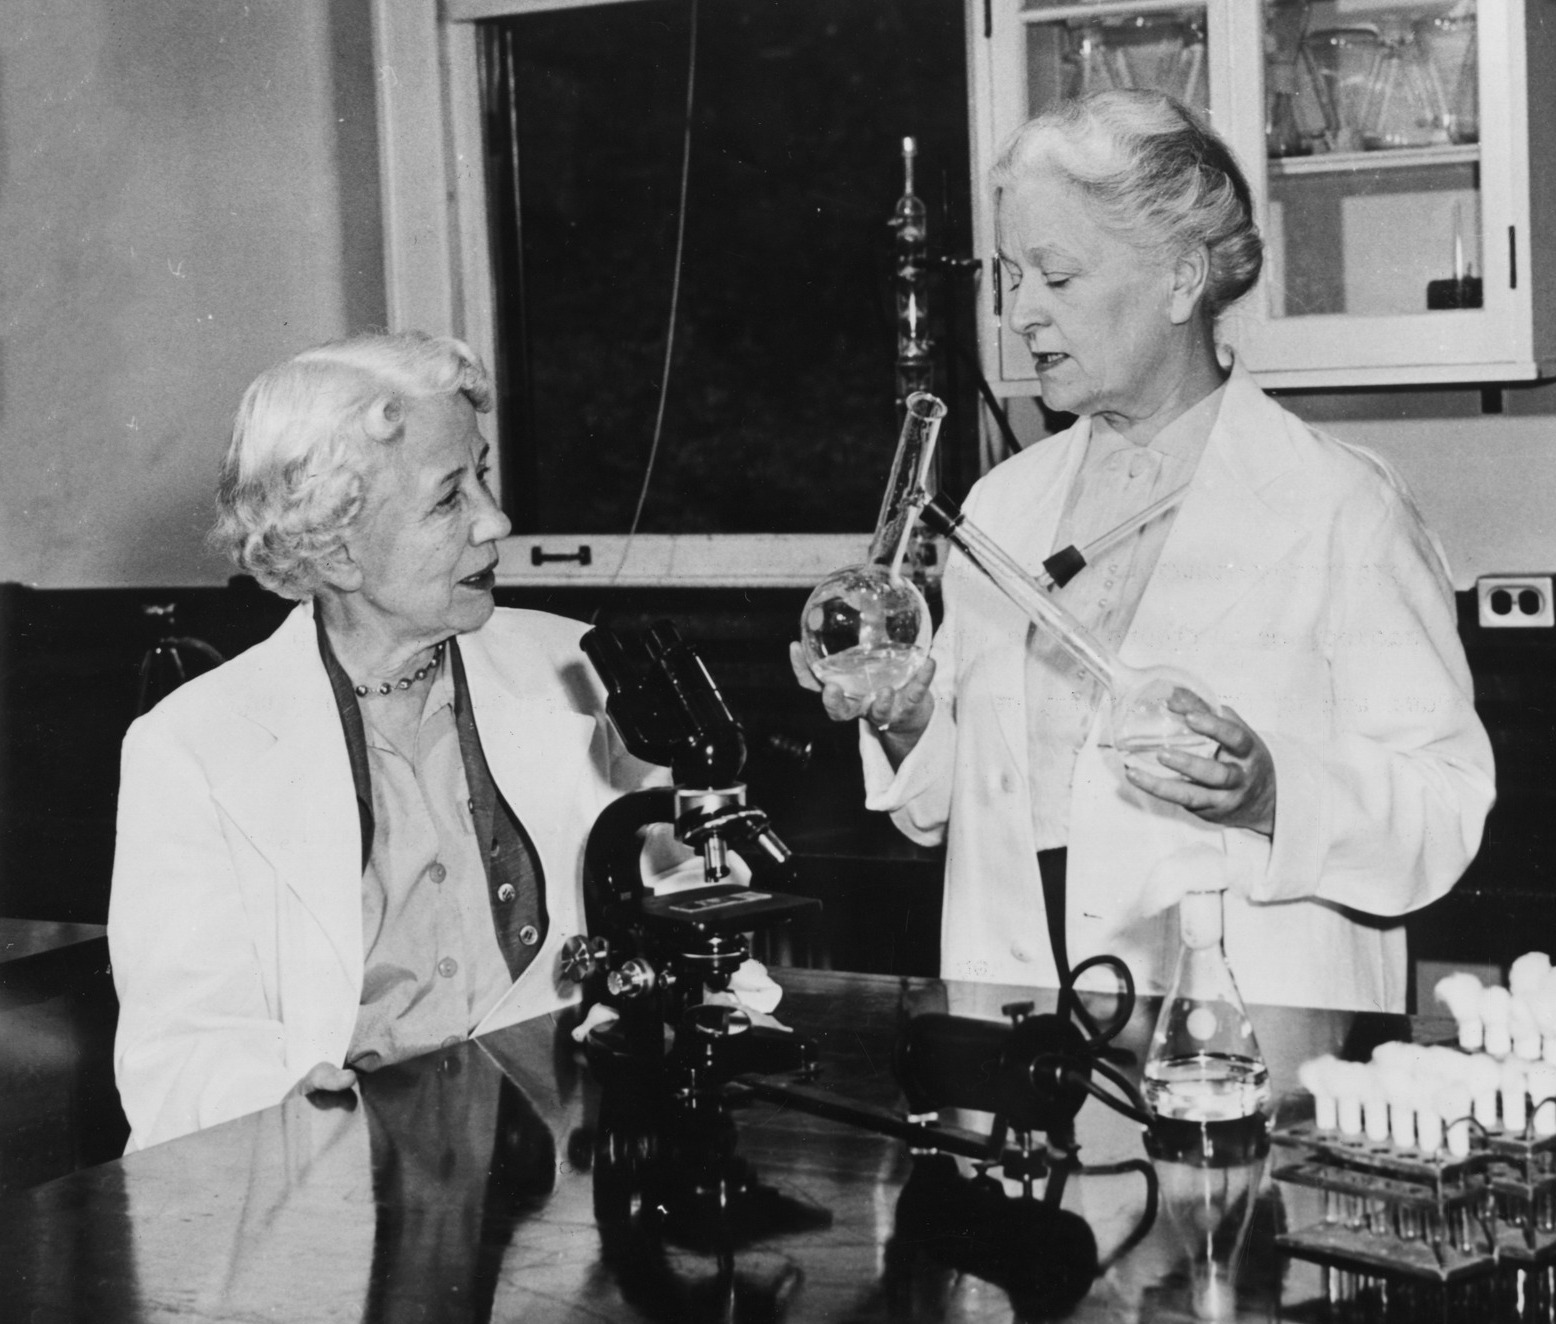 Elizabeth Lee Hazen and Rachel BrownBy Smithsonian Institution - Flickr: Elizabeth Lee Hazen (1888-1975) and Rachel Brown (1898-1980), No restrictions, https://commons.wikimedia.org/w/index.php?curid=18386483